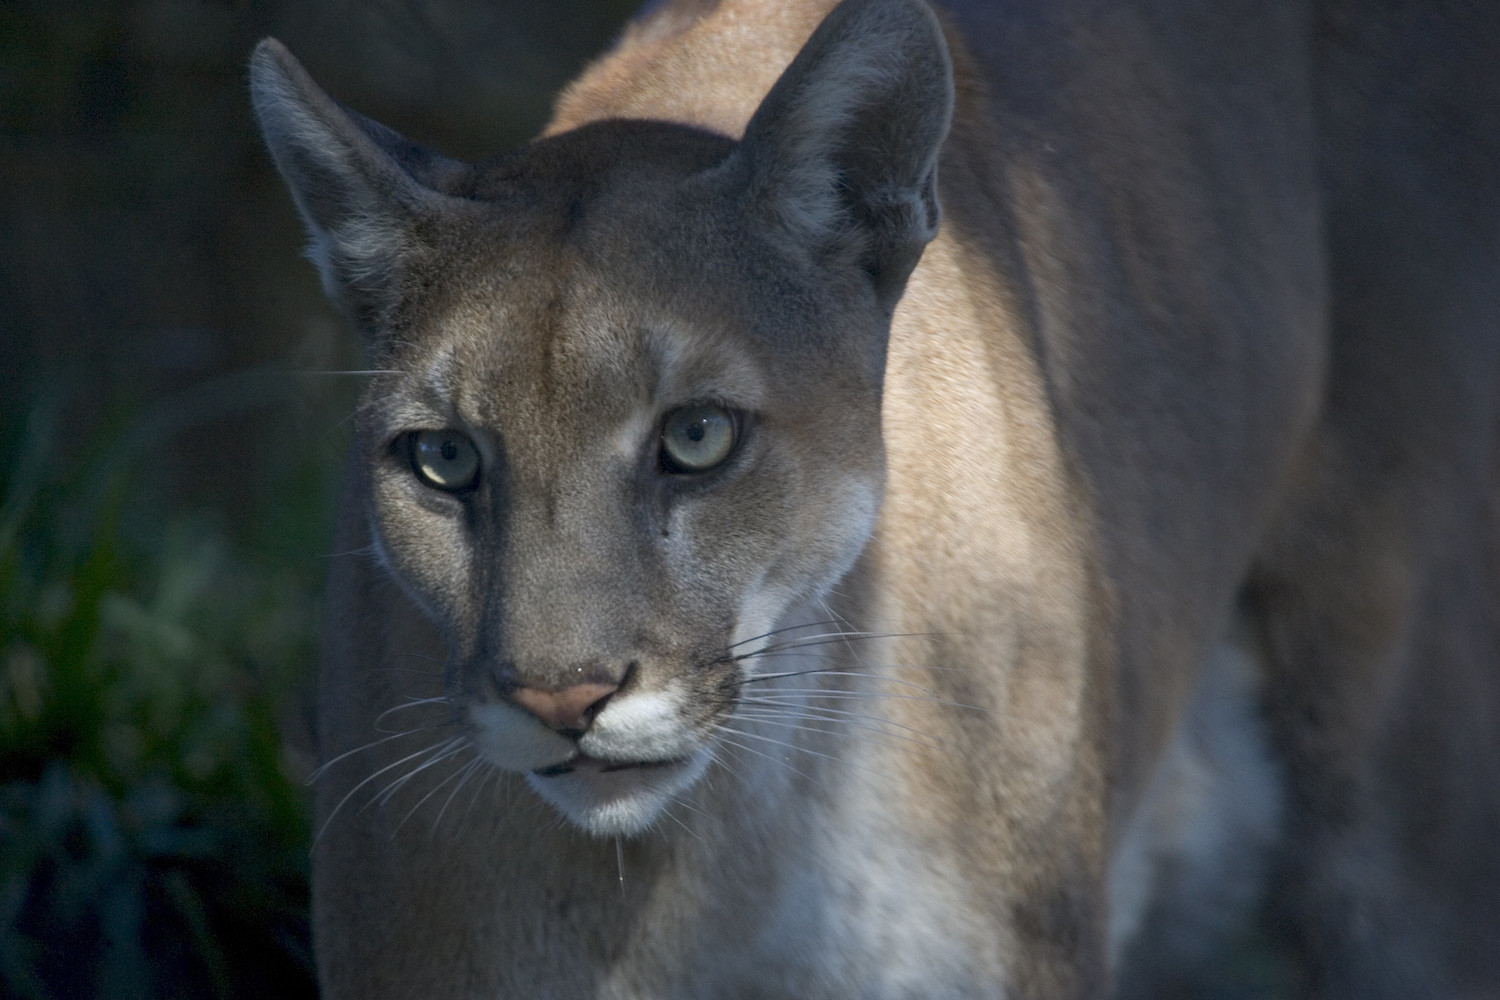 Florida panthers in Southern Florida are killing tons of deer.